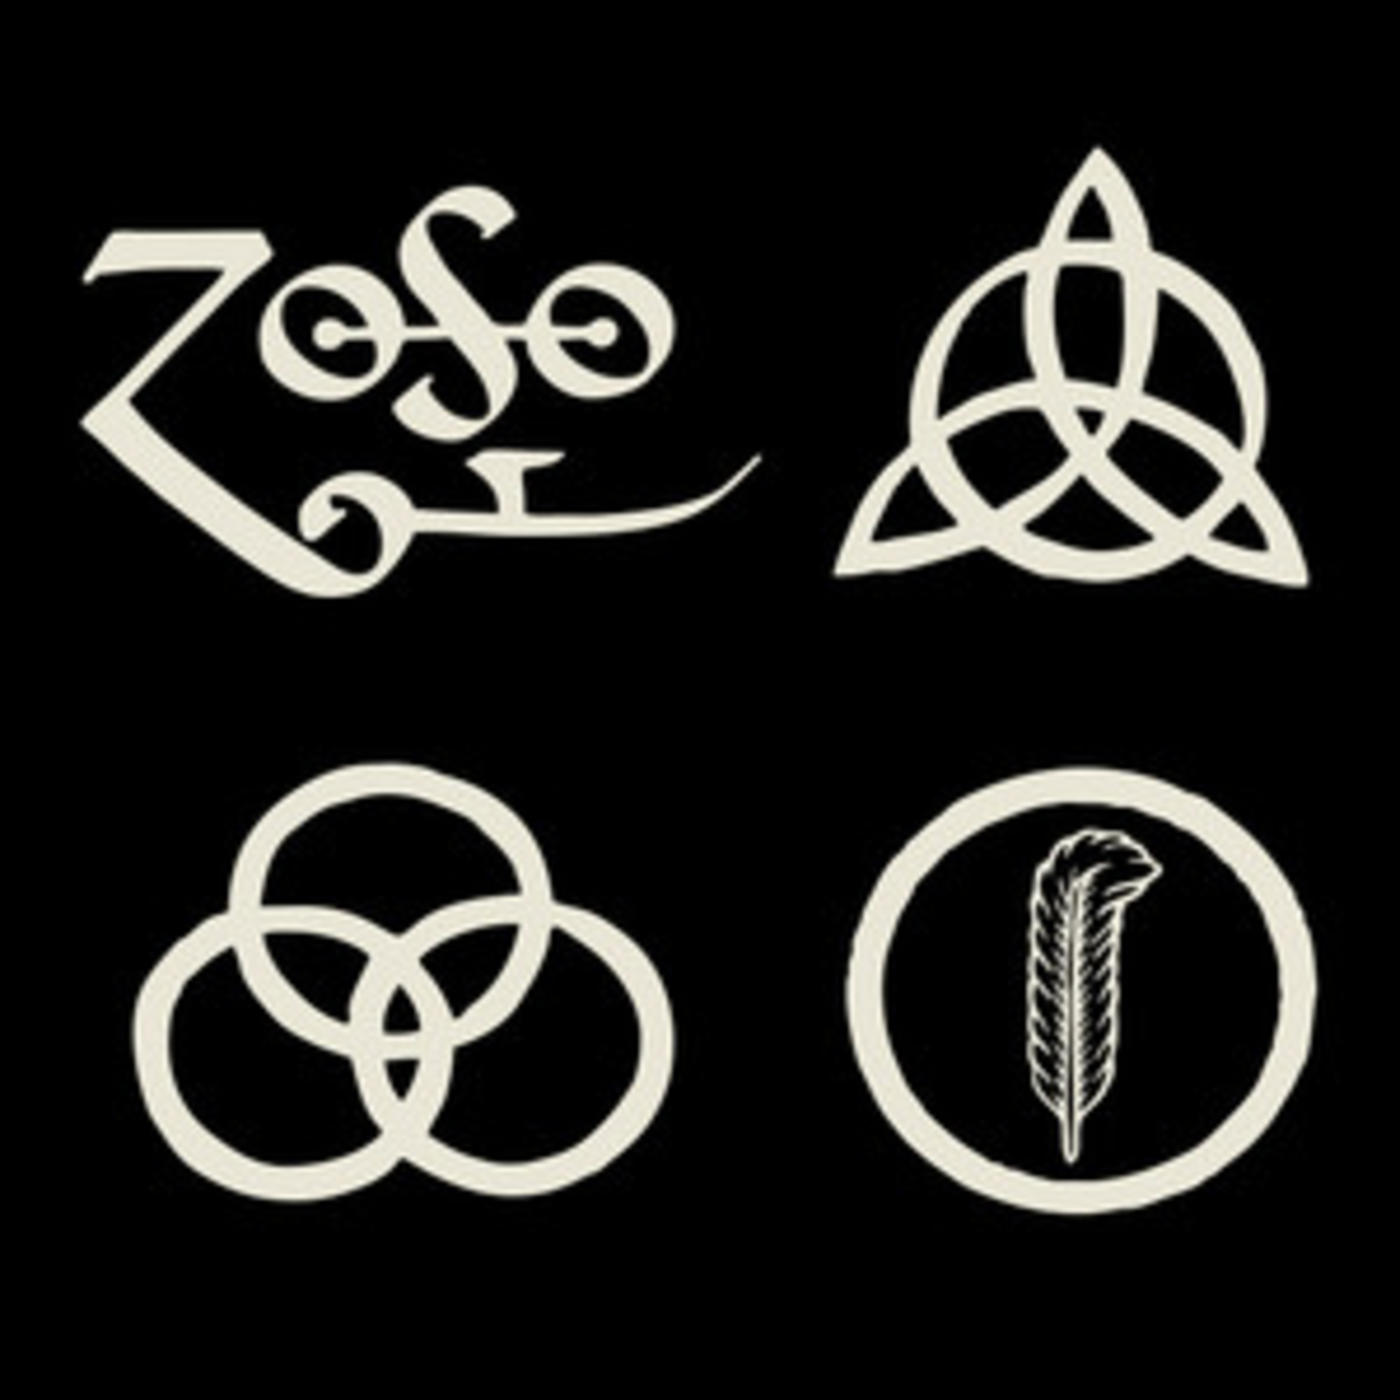 Official Led Zeppelin Deluxe Editions - I, II, III, IV, Houses of the Holy, Physical Graffiti